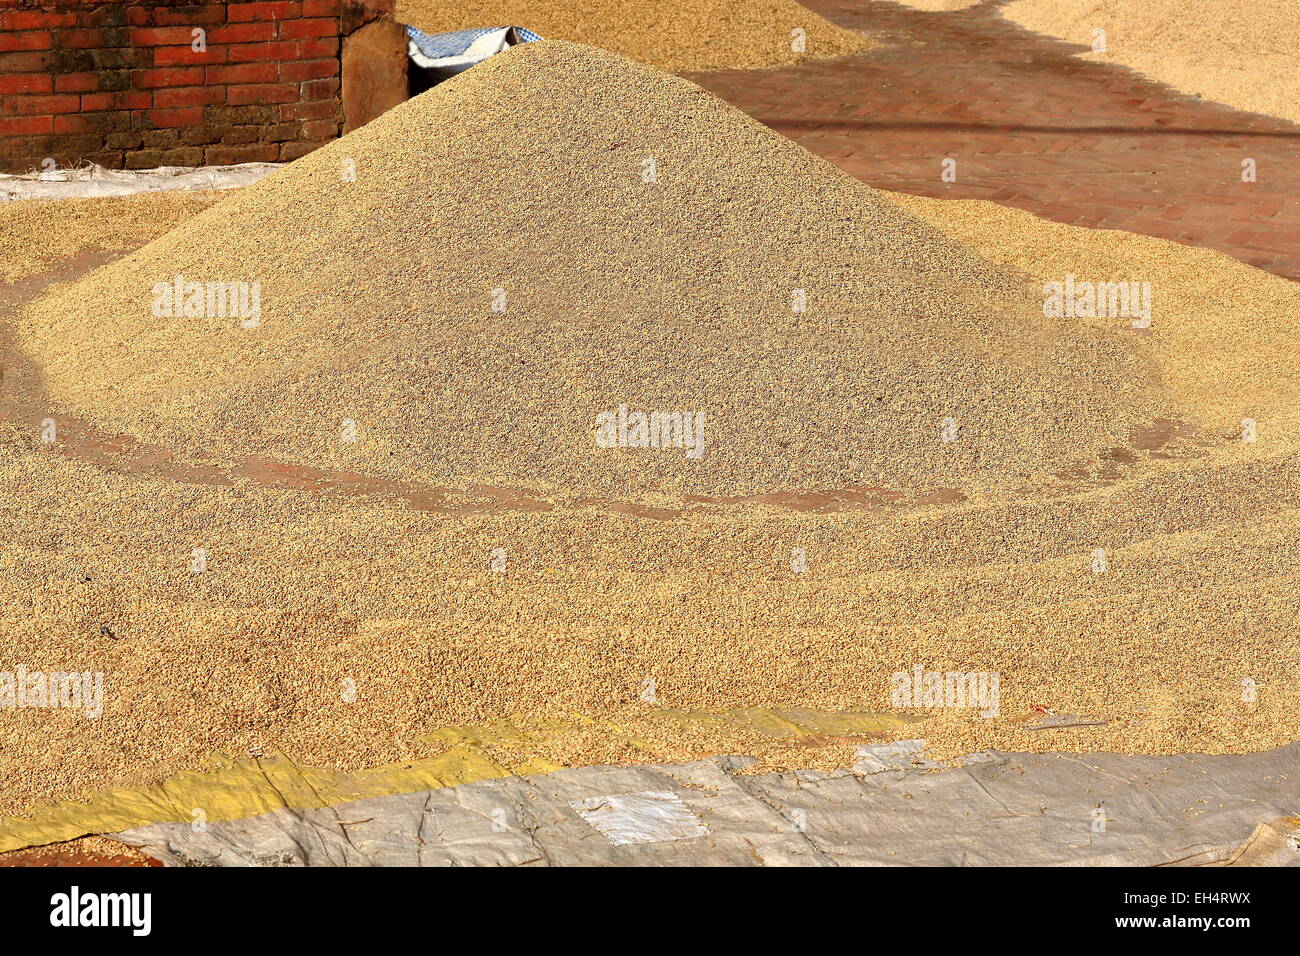 Paddy Rice Sundrying Laid On A Plastic Raffia Mat On The Red Brick